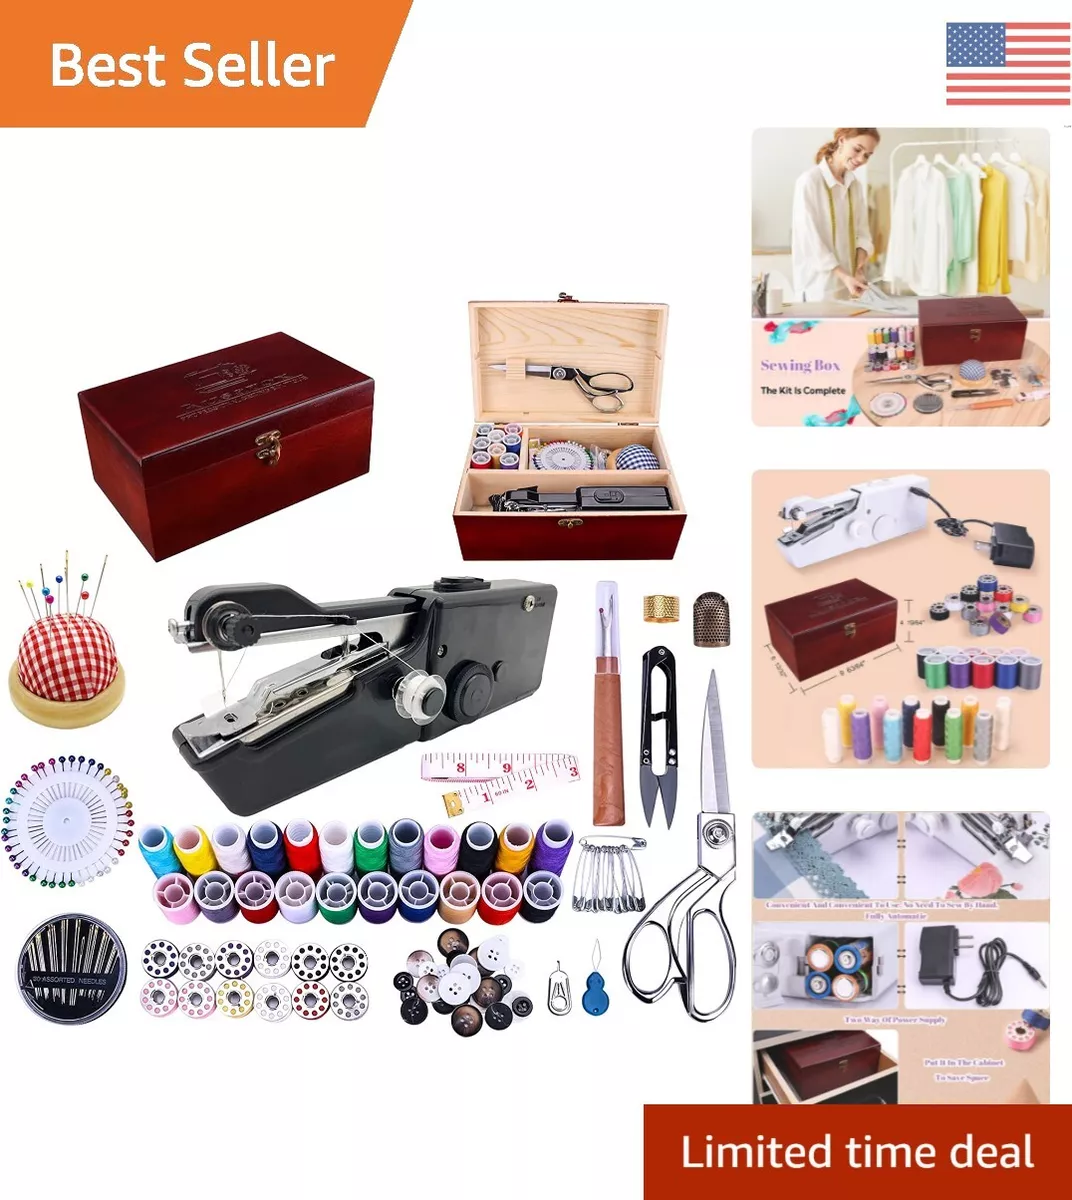 Handheld Sewing Machine, Hand held Sewing Device Heavy duty, Hand Sewing  Machine Portable, Wooden Sewing Box with 153 Pcs Sewing Kit